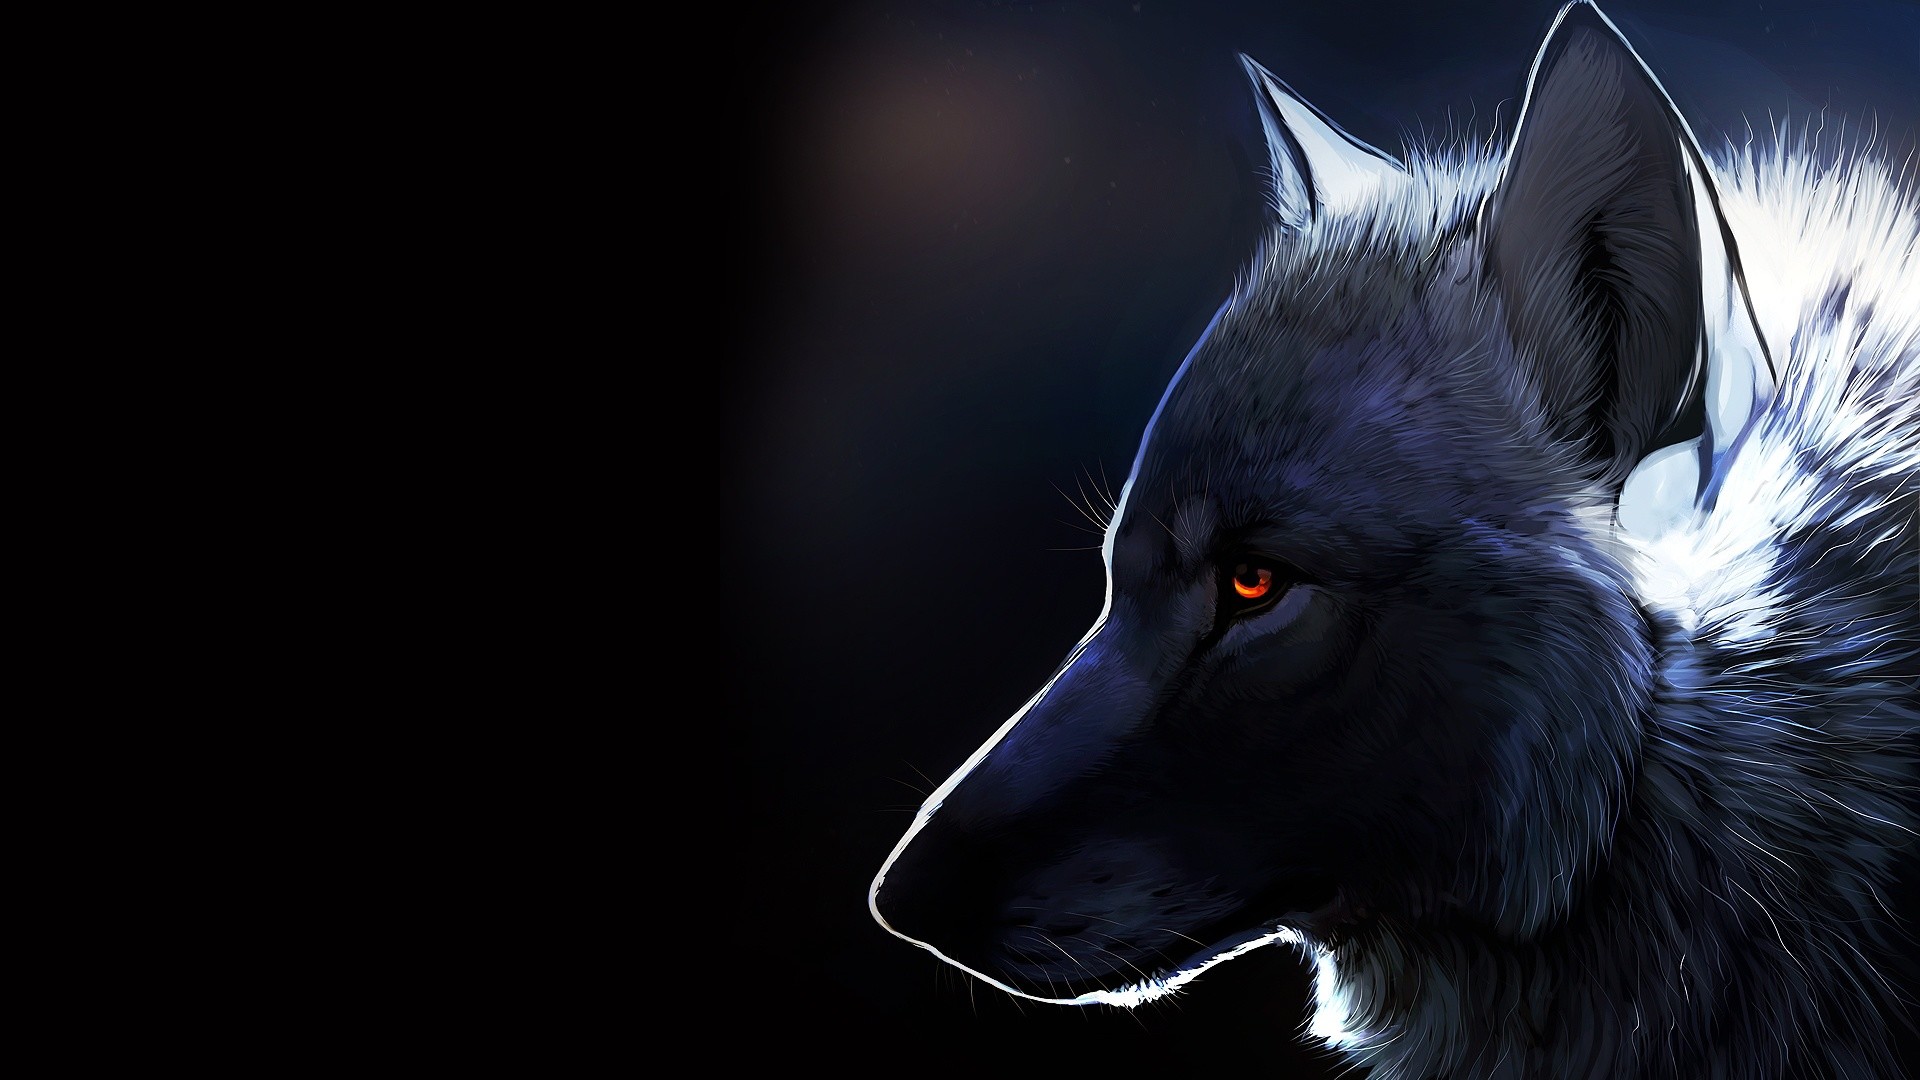 1920x1080 Animated Wolf Wallpapers Group 1920Ã1080 Animated Wolf Wallpapers |  Adorable Wallpapers